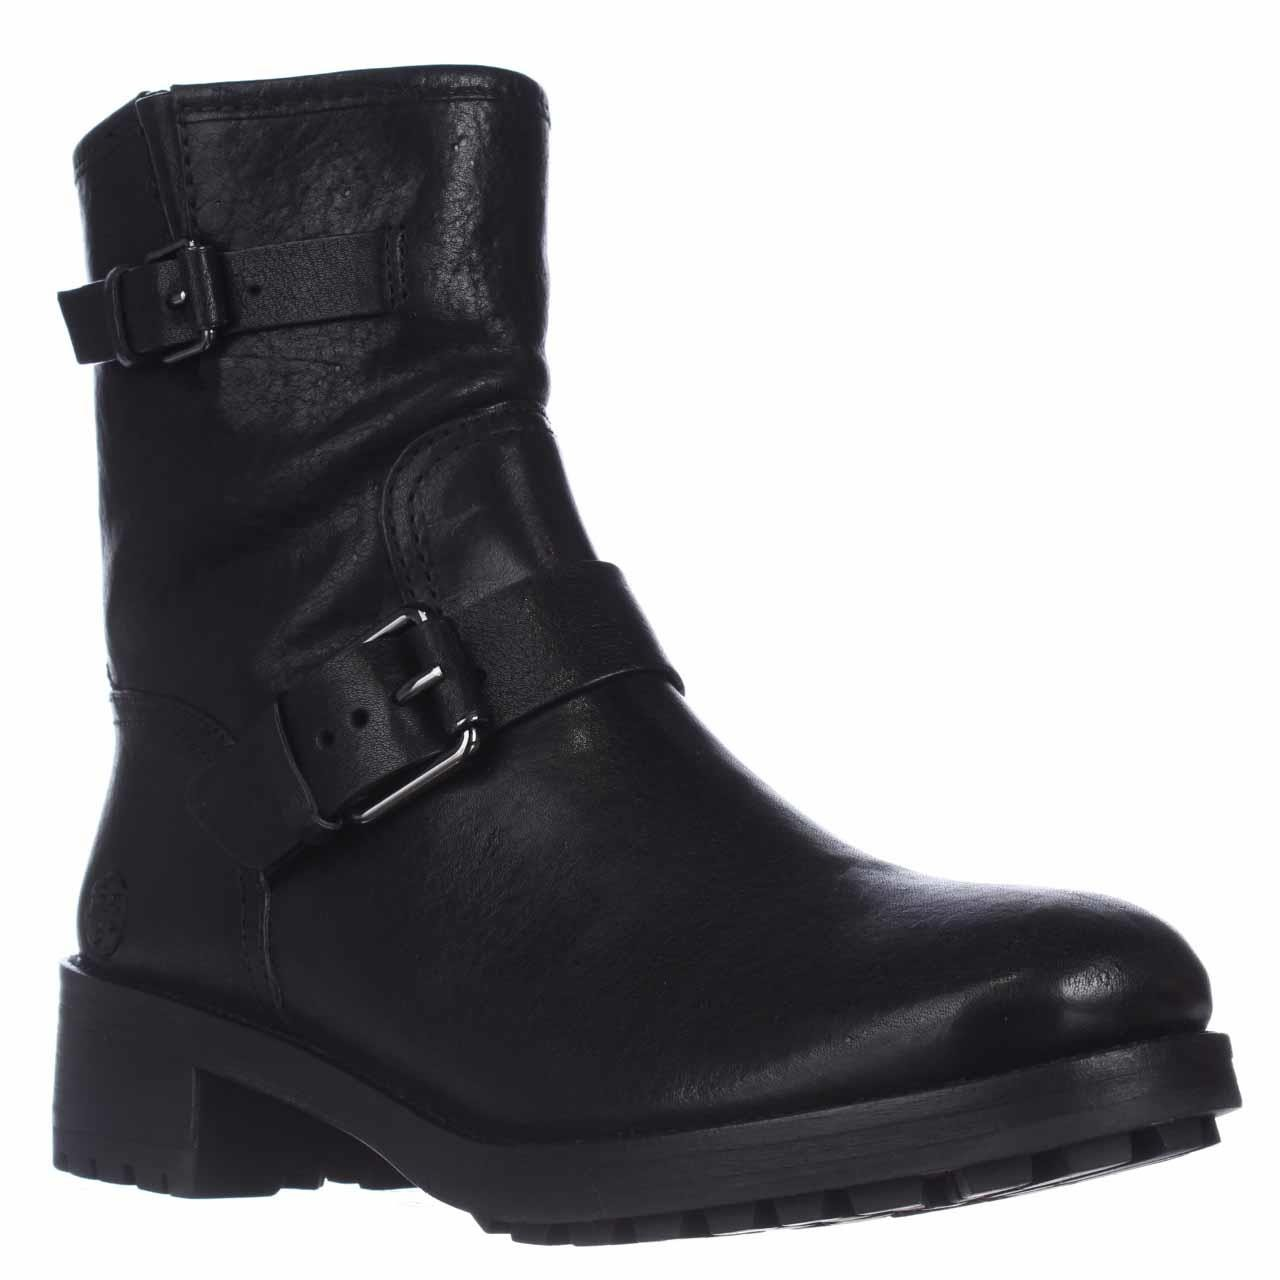 Tory burch Chrystie Motorcycle Mid-calf Boots in Black | Lyst